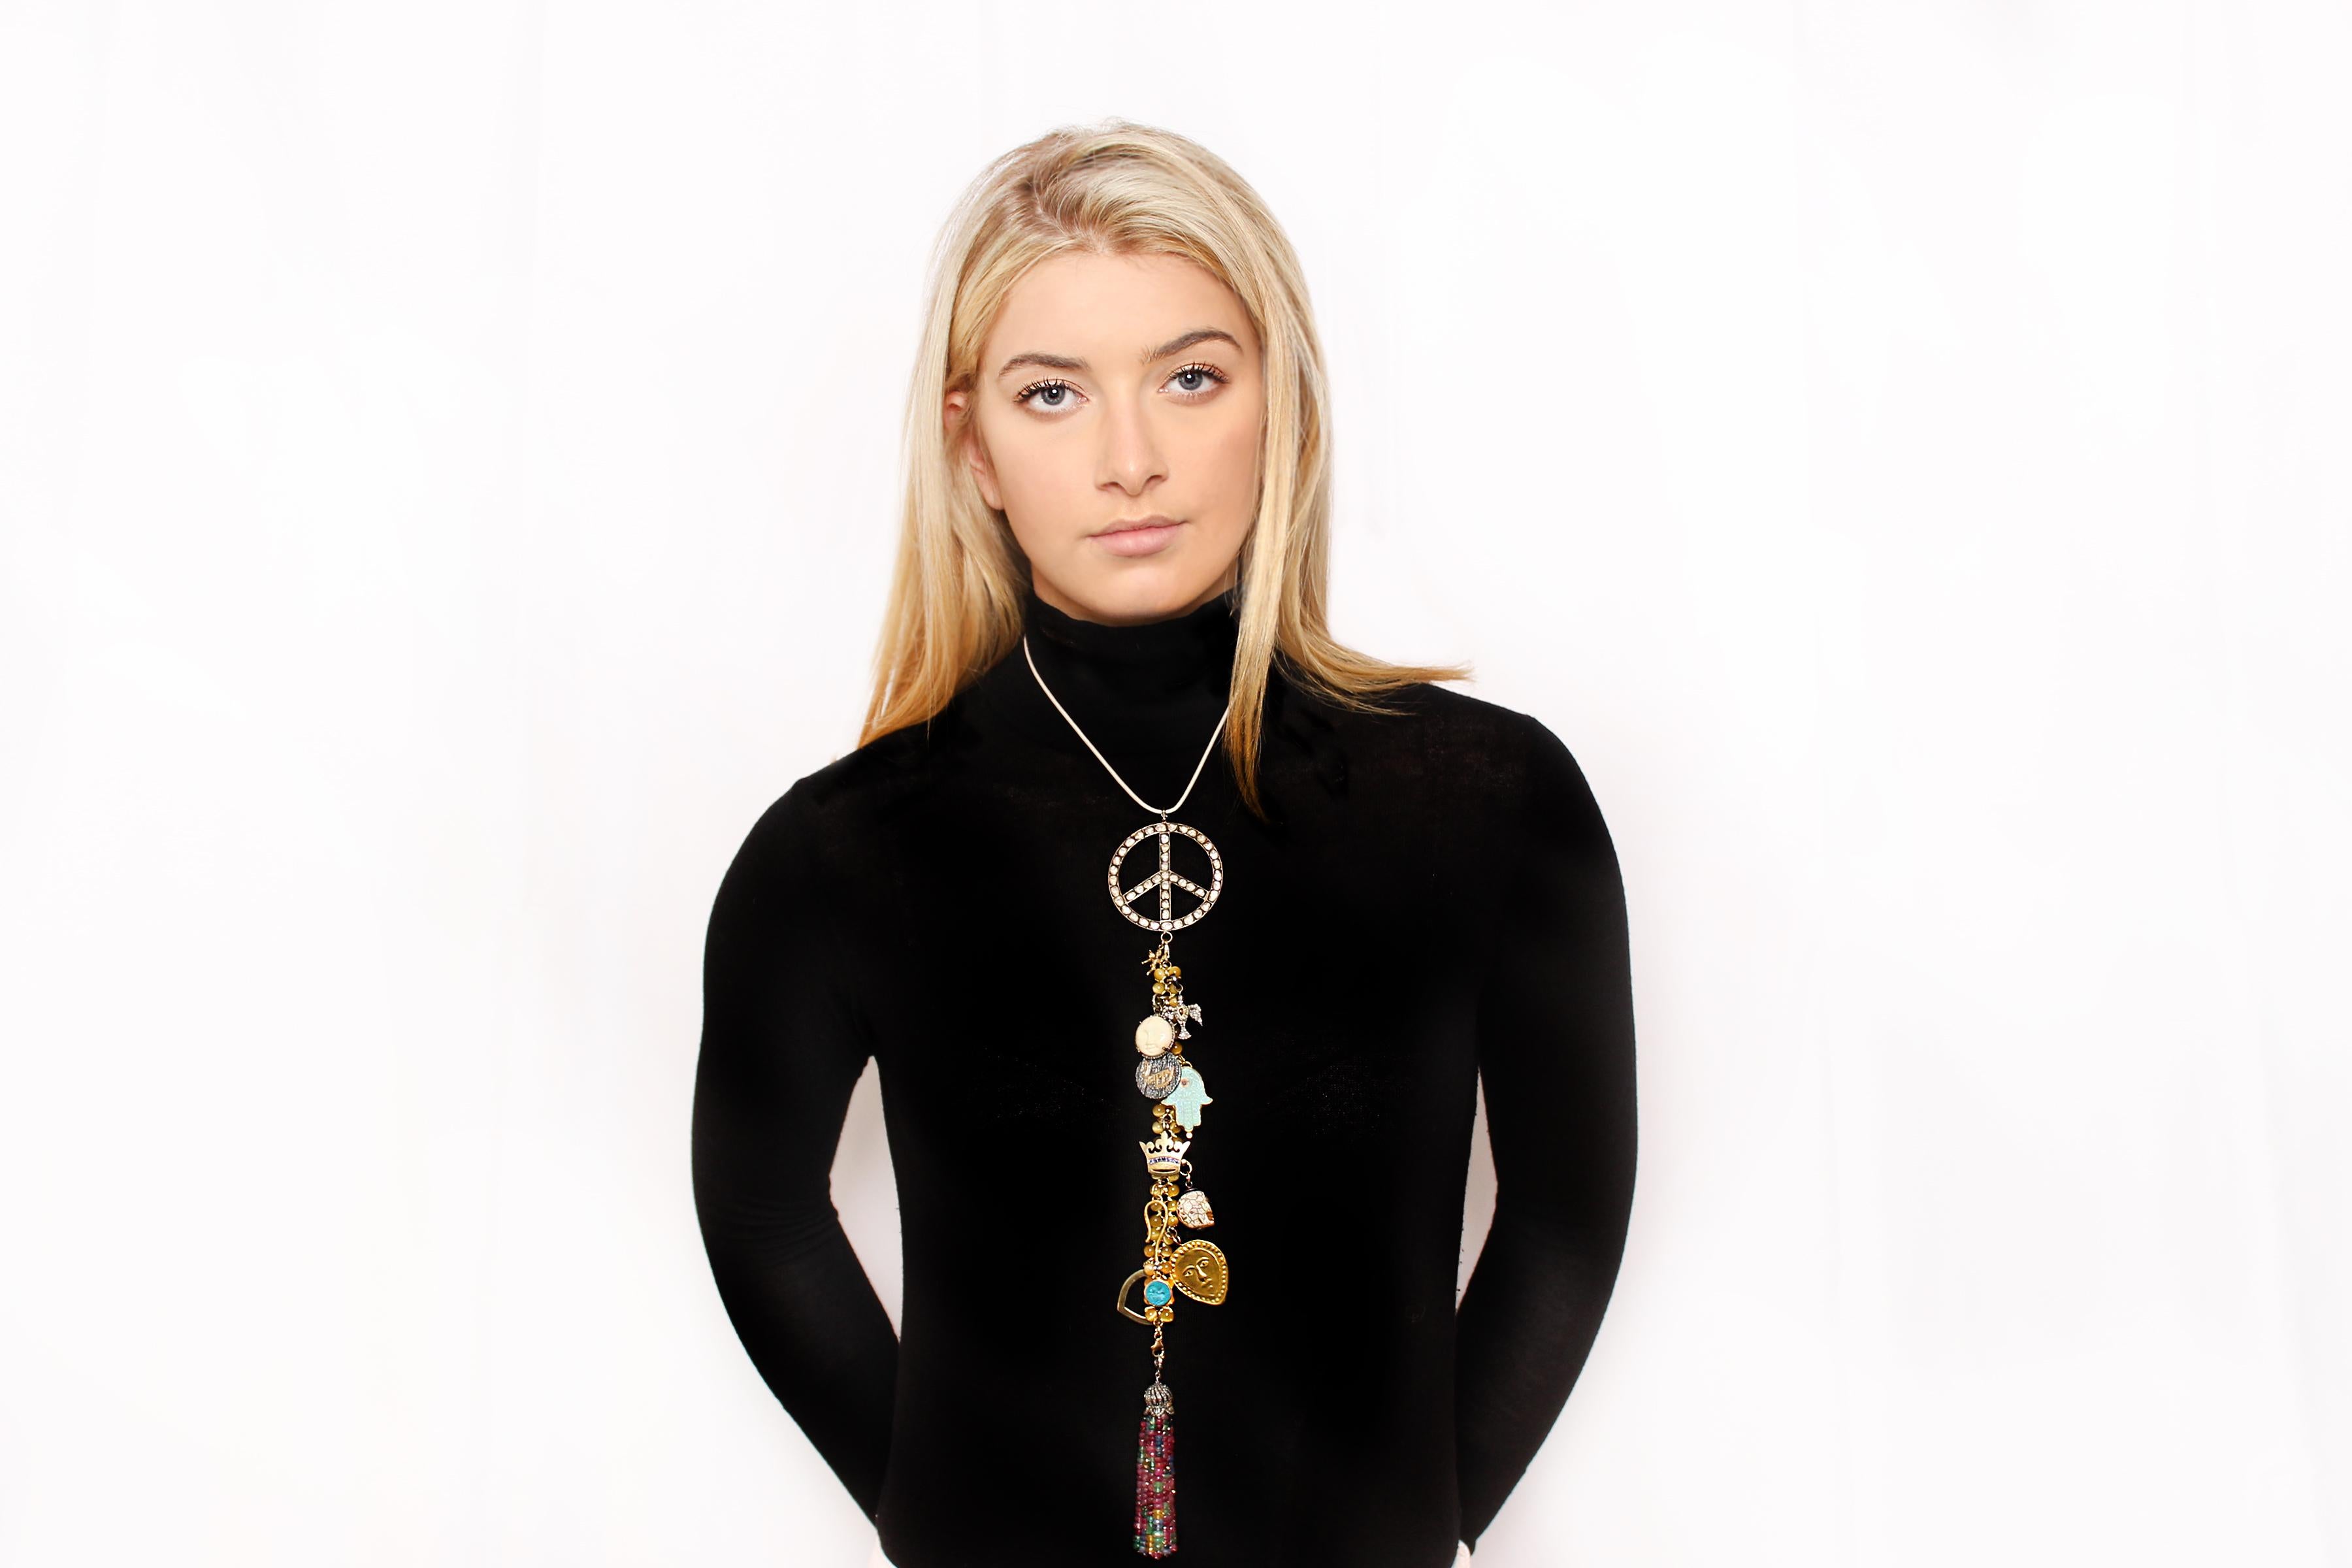 Our signature Symbol Tree Necklaces are each unique and made to be versatile. Attaches to 14 inch Genuine Black Leather Cord with 14K Gold Auto Lock Clasp (included) so charms cascade down - top and bottom pendants can be removed so piece can also